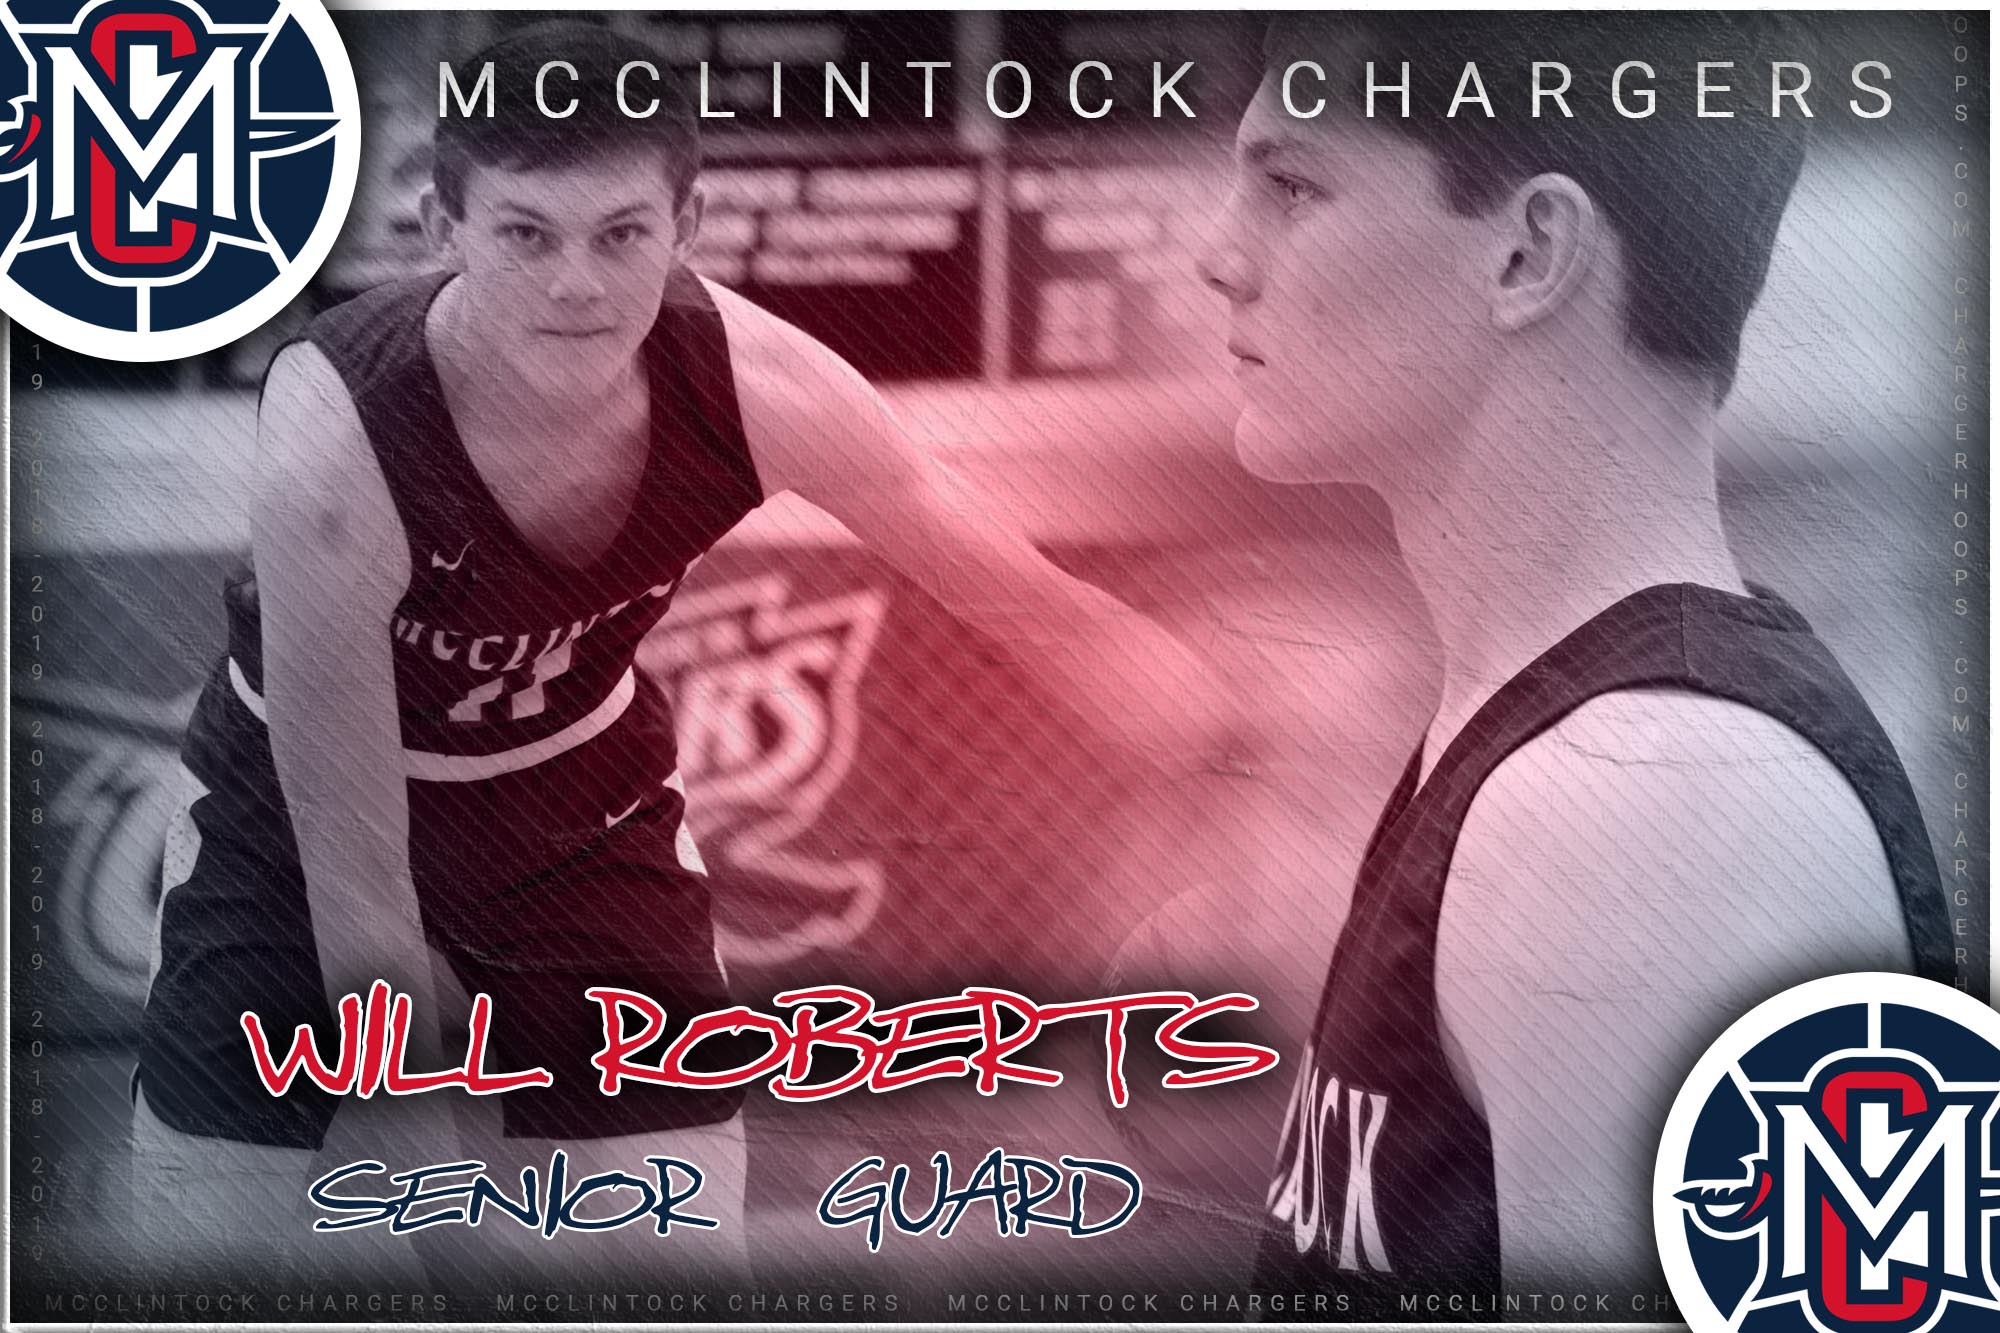 McClintock Chargers Basketball- Will Roberts